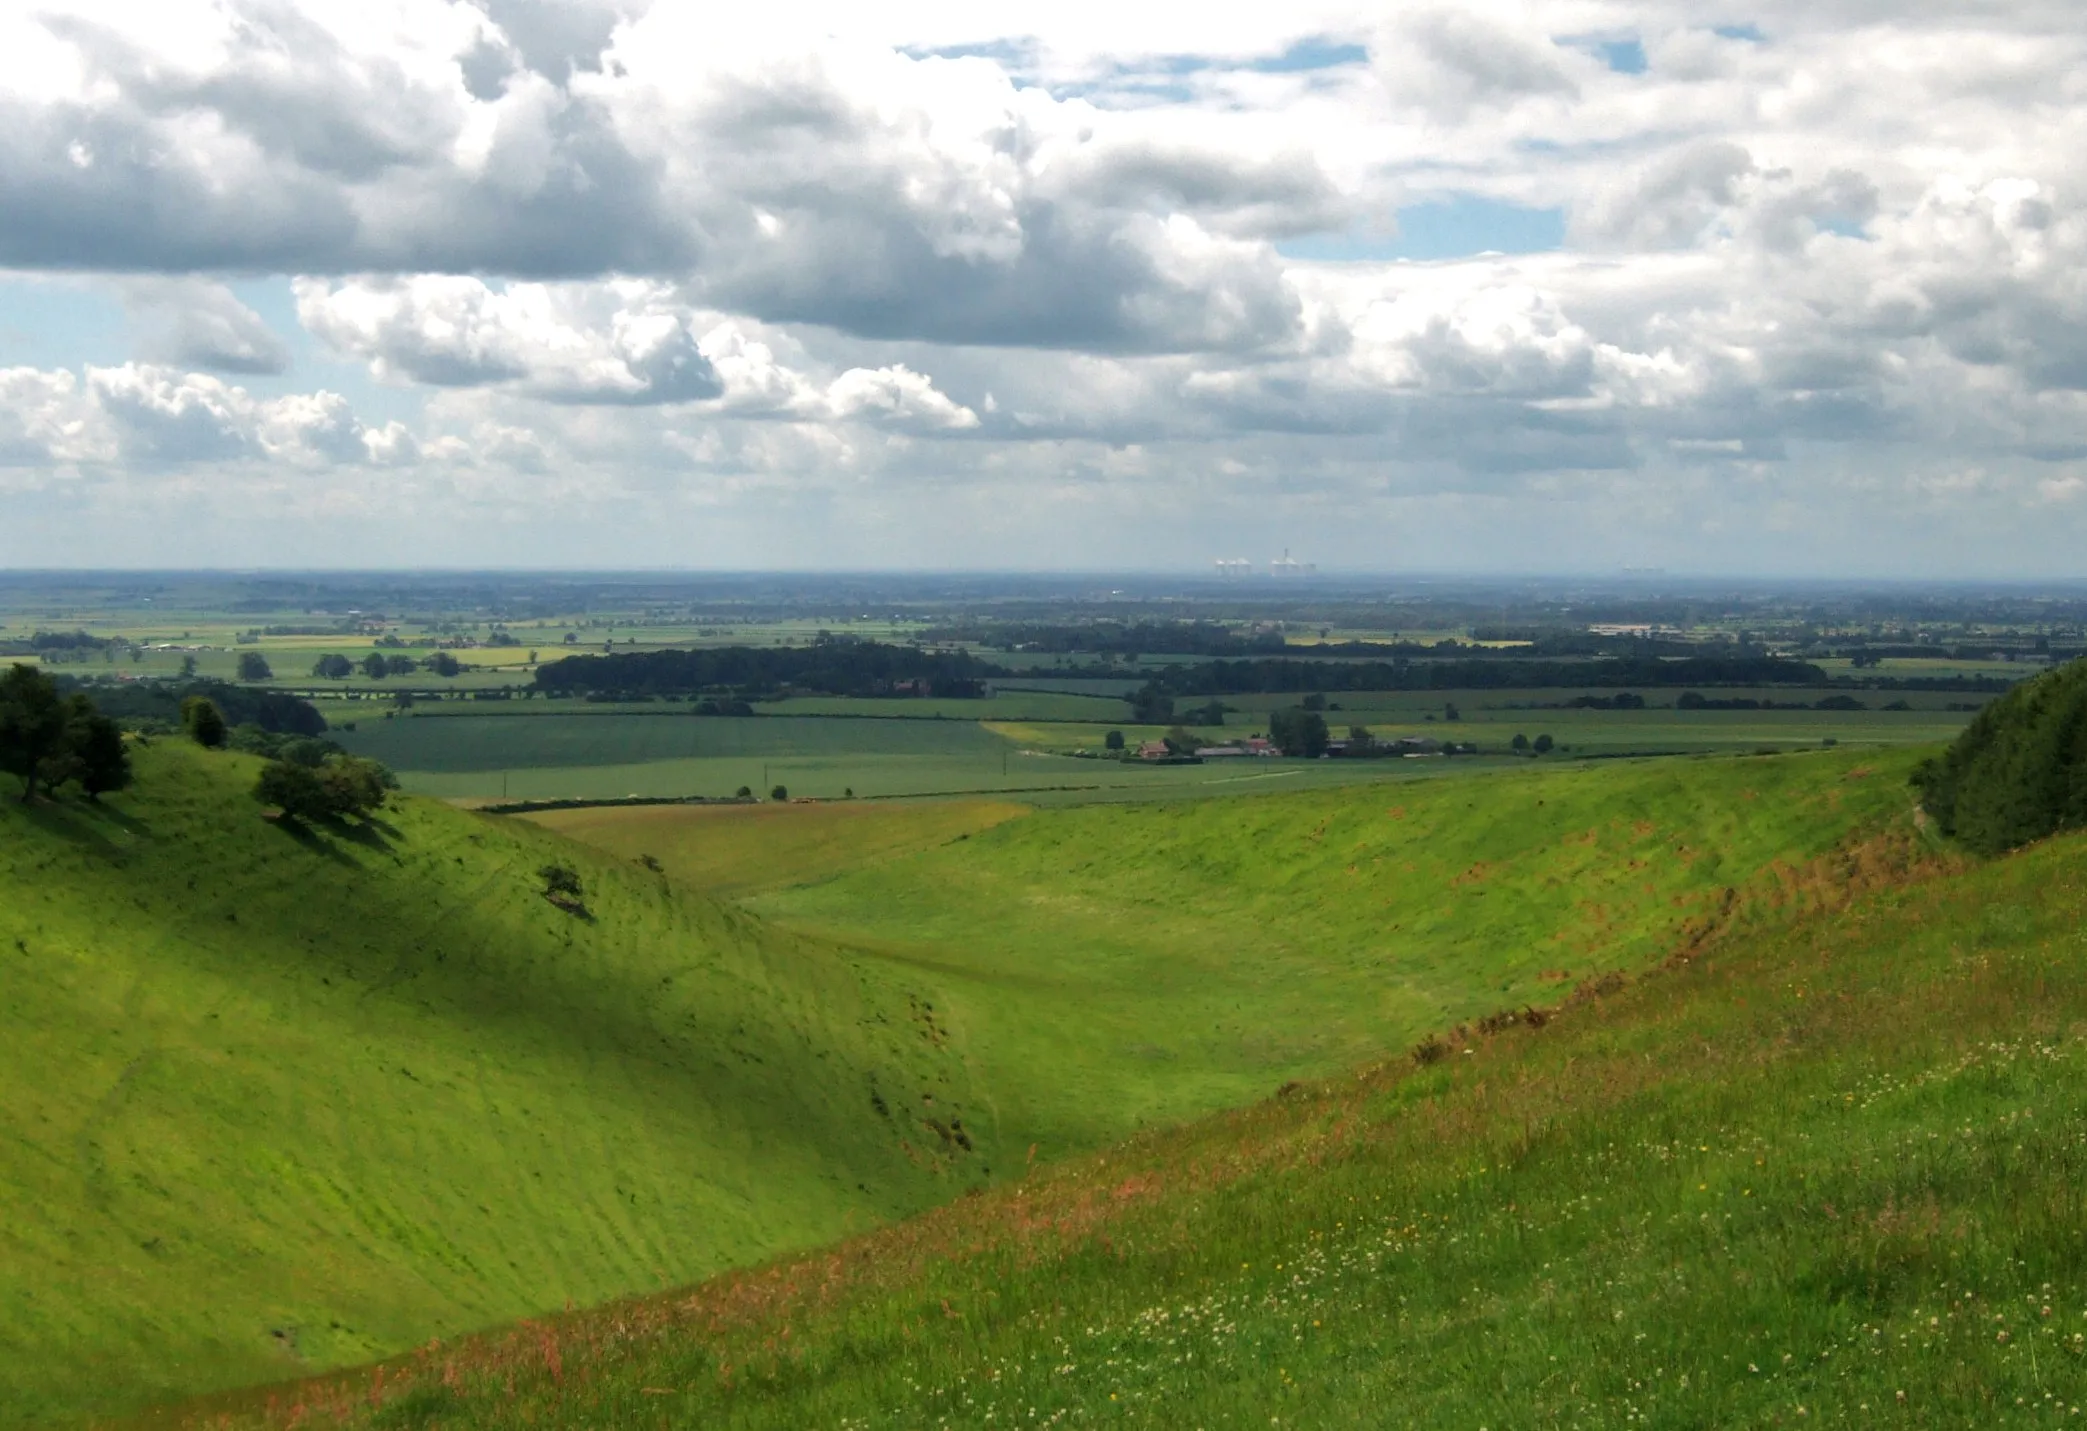 Photograph of Cleaving Coombe, Yorkshire Wolds